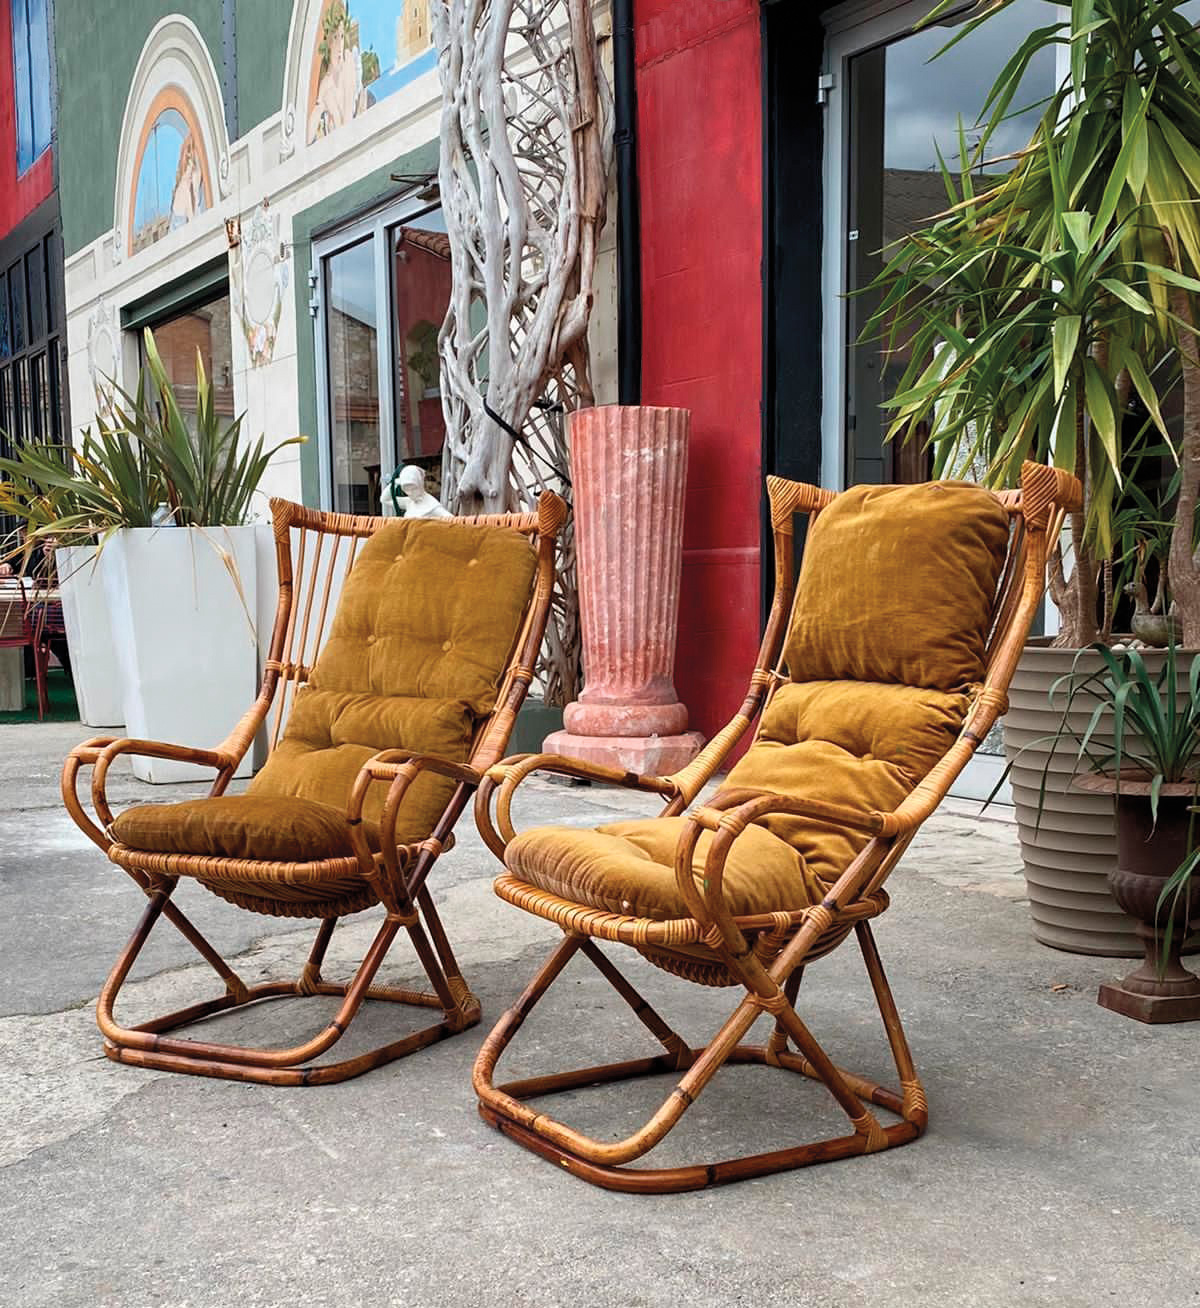 A pair of vintage chairs sitting on a sidewalk in front of a storefront